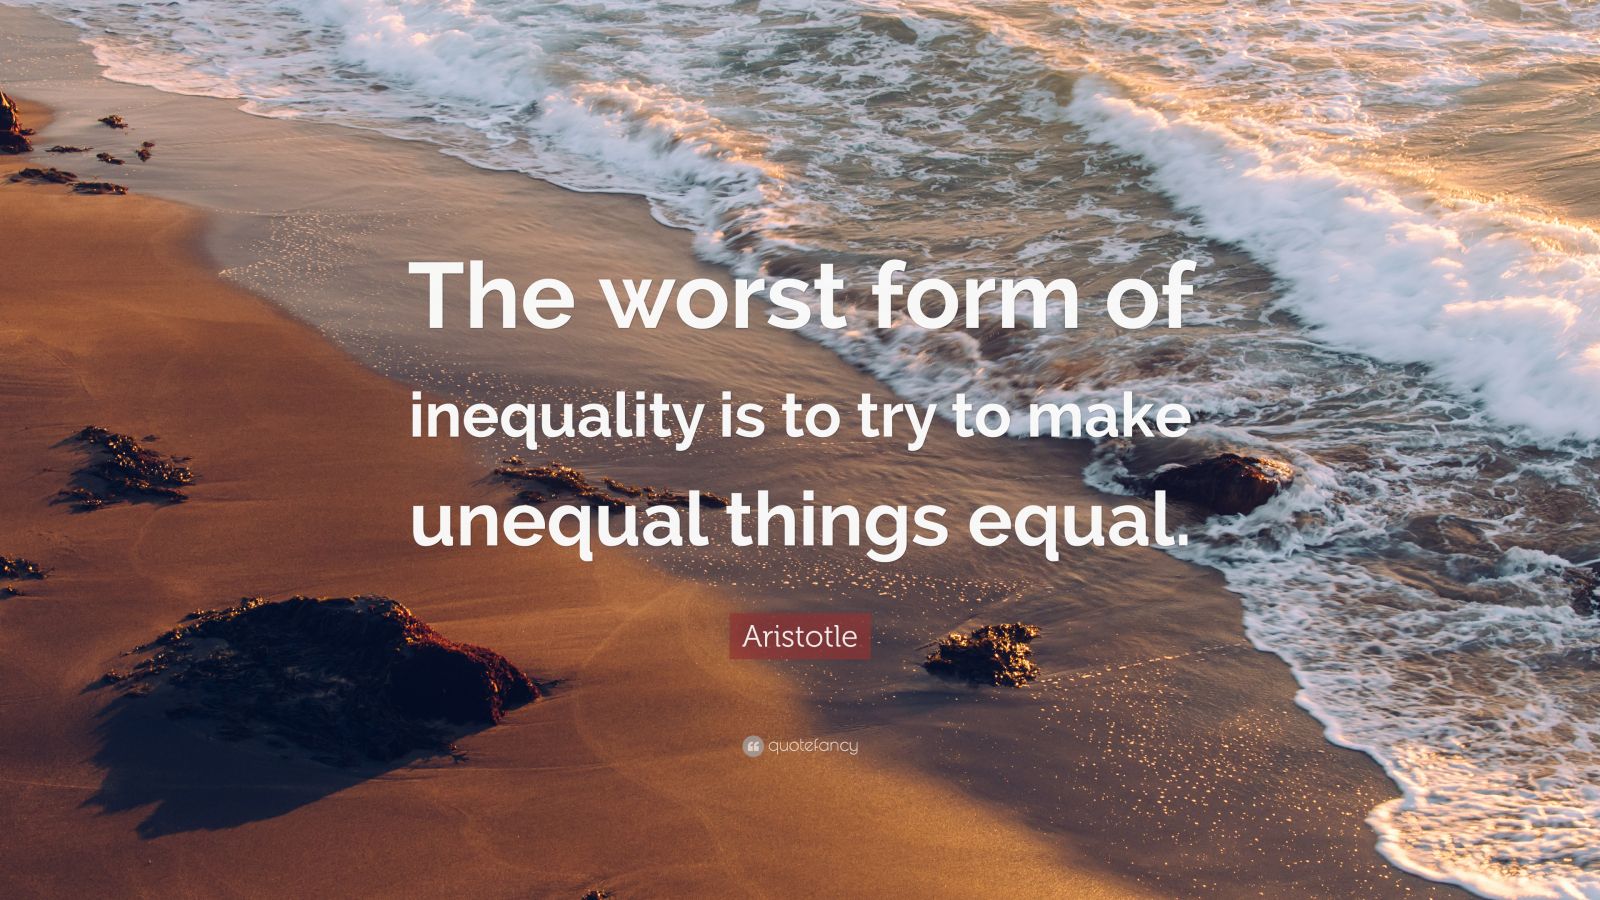 Best Inequality Quotes of all time The ultimate guide 